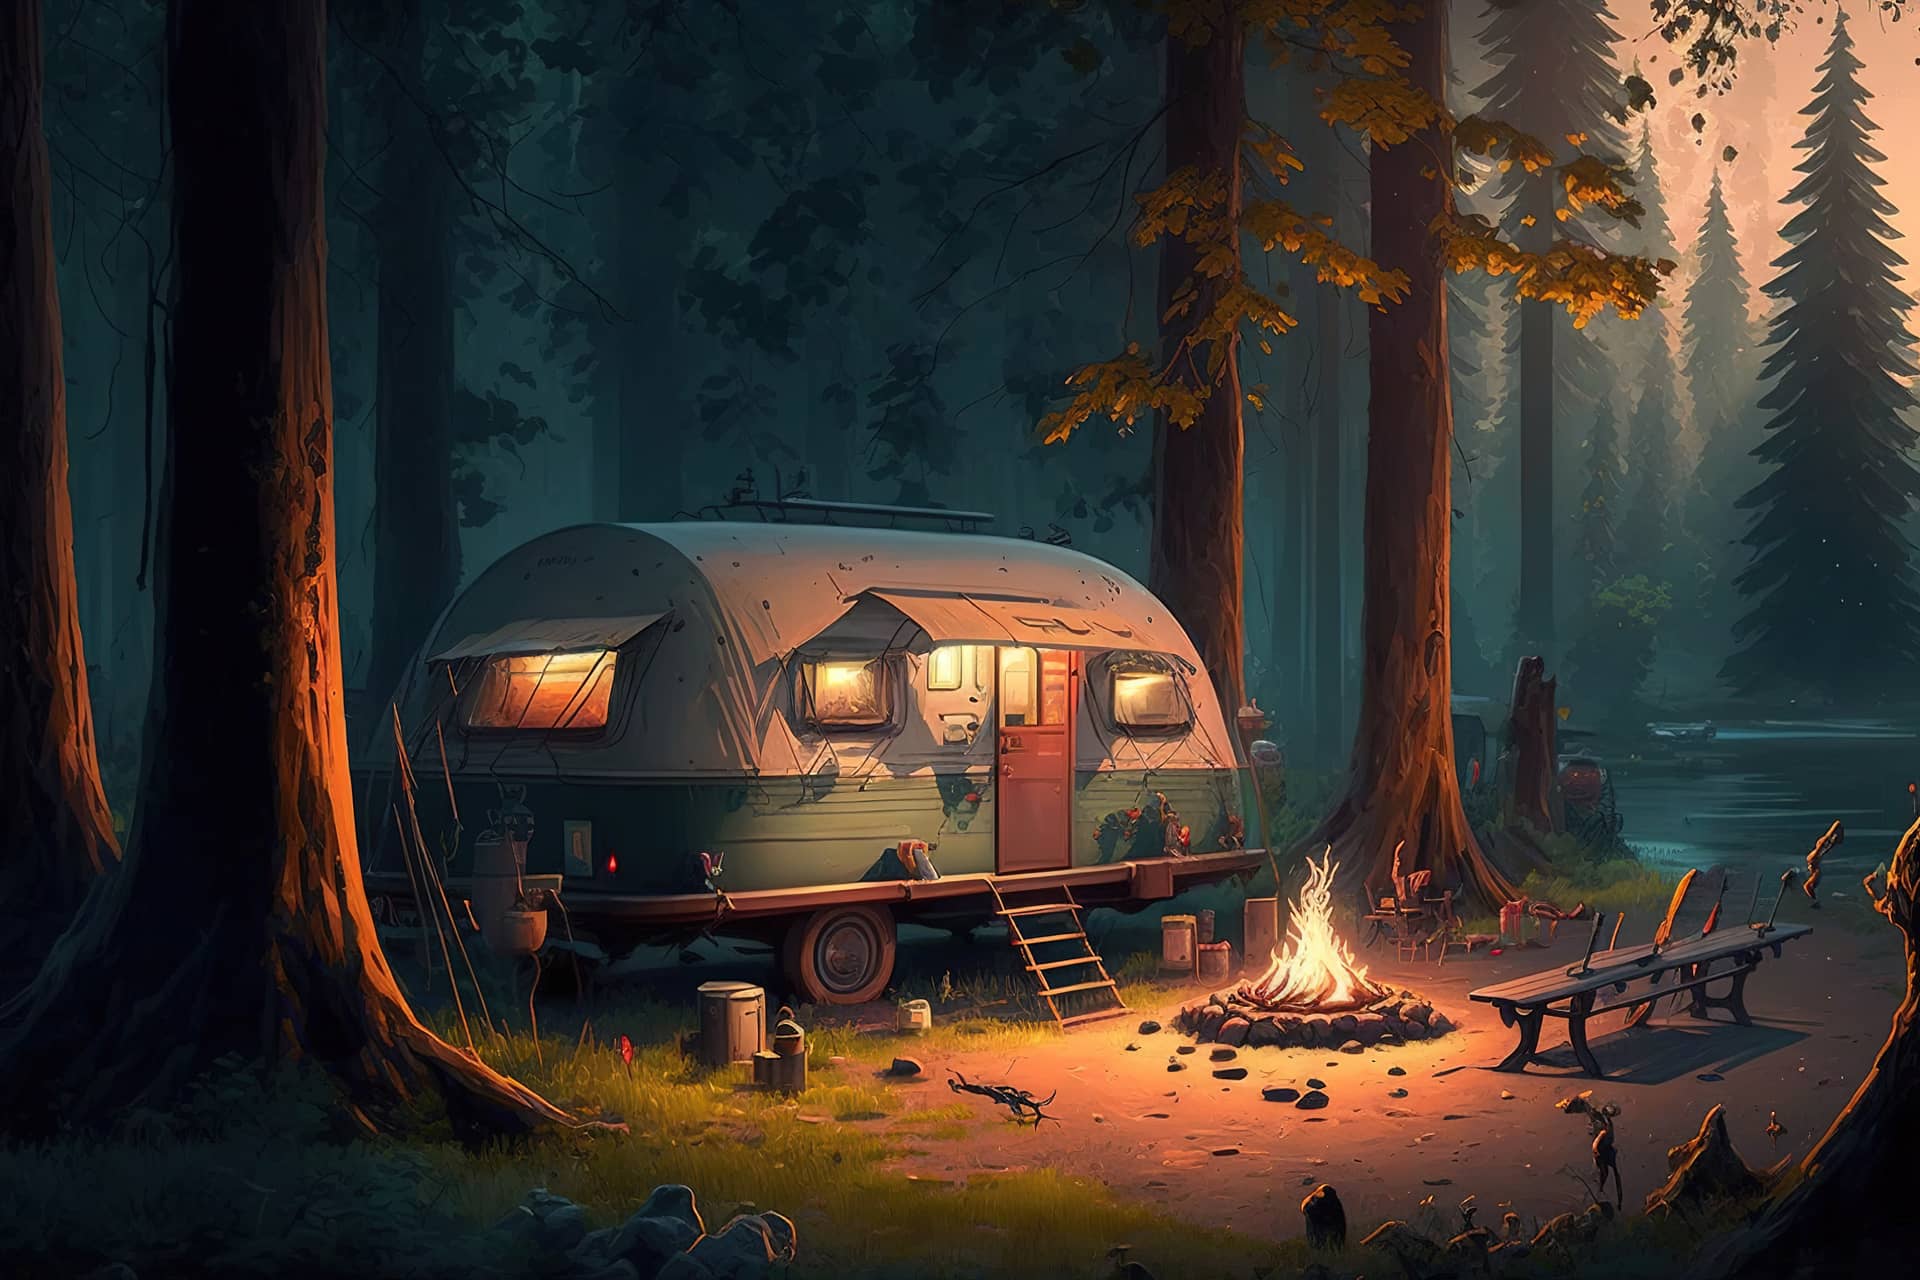 Camping night forest with camp fire image